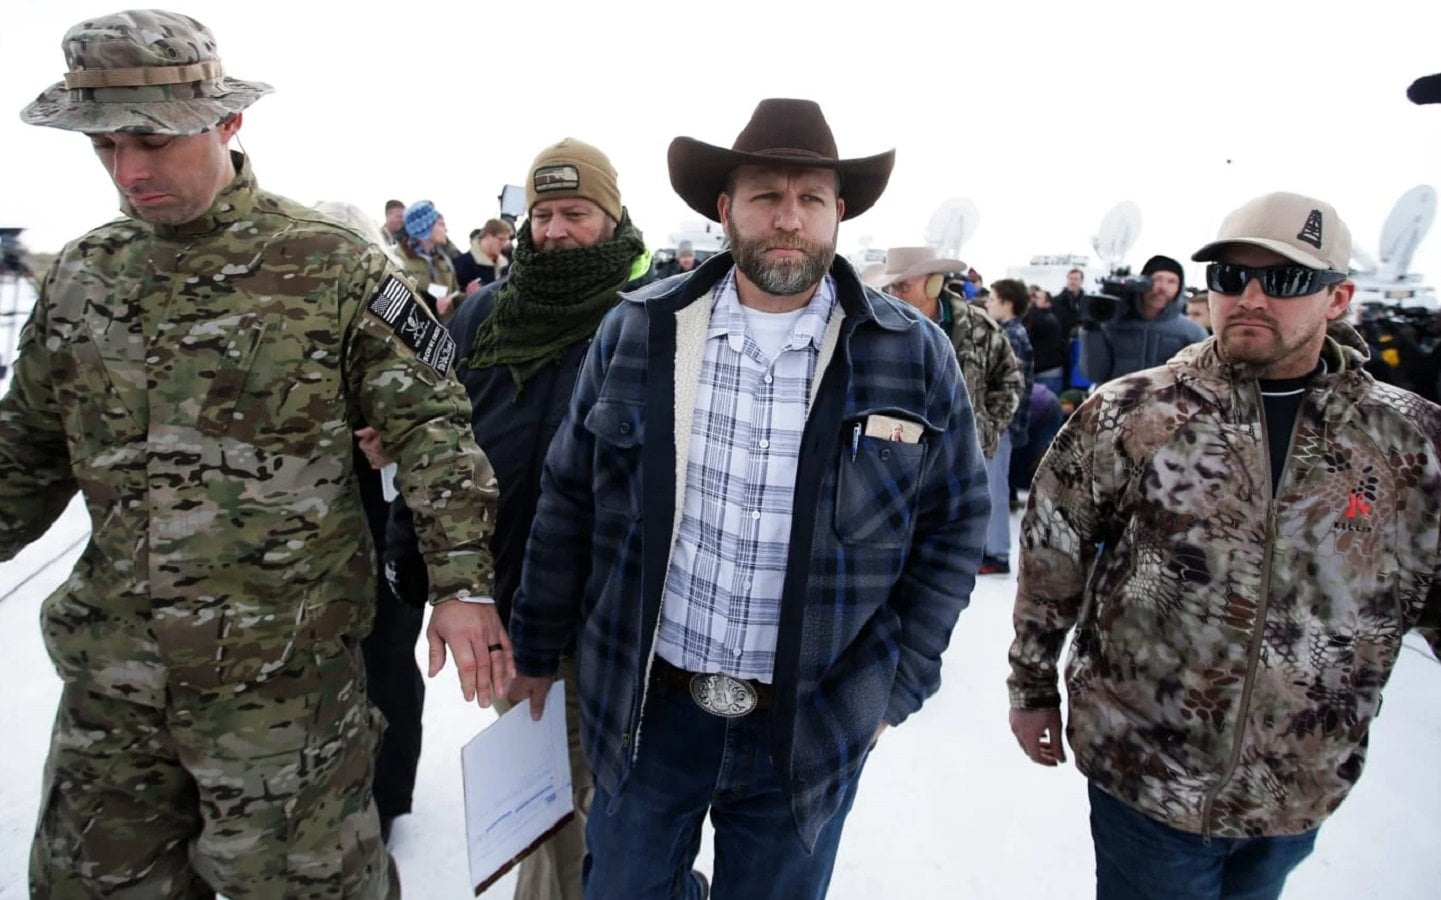 Ammon Bundy Arrested After Refusing to Wear a Mask Into Courthouse and Not Being Allowed Into His Own Trial (VIDEO)